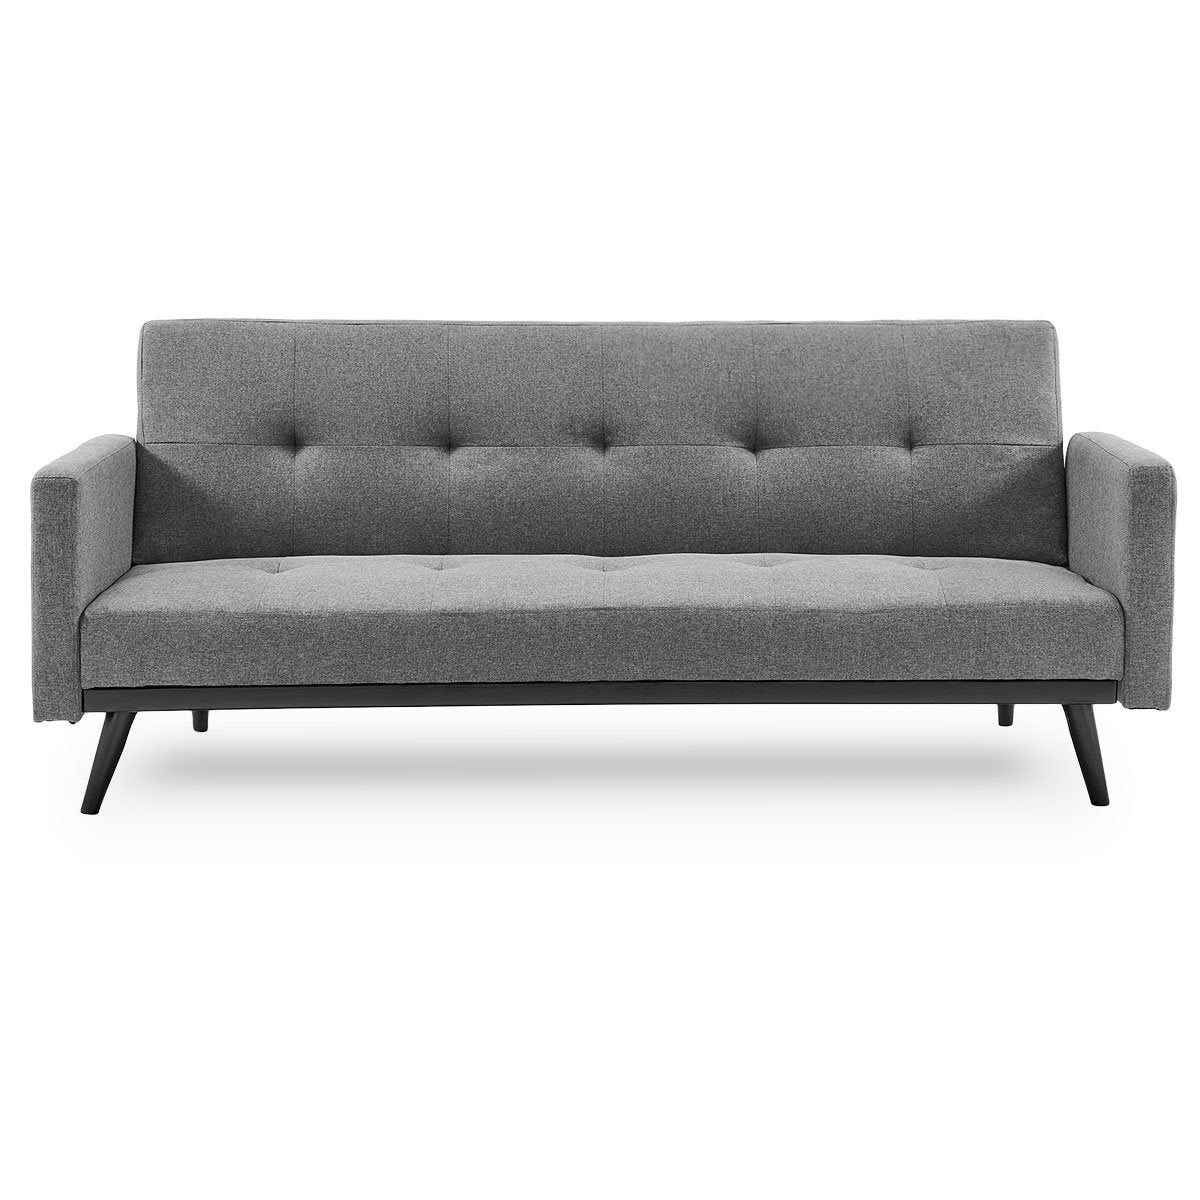 Sarantino Tufted Faux Linen 3-Seater Sofa Bed - Light Grey | Armrests Included